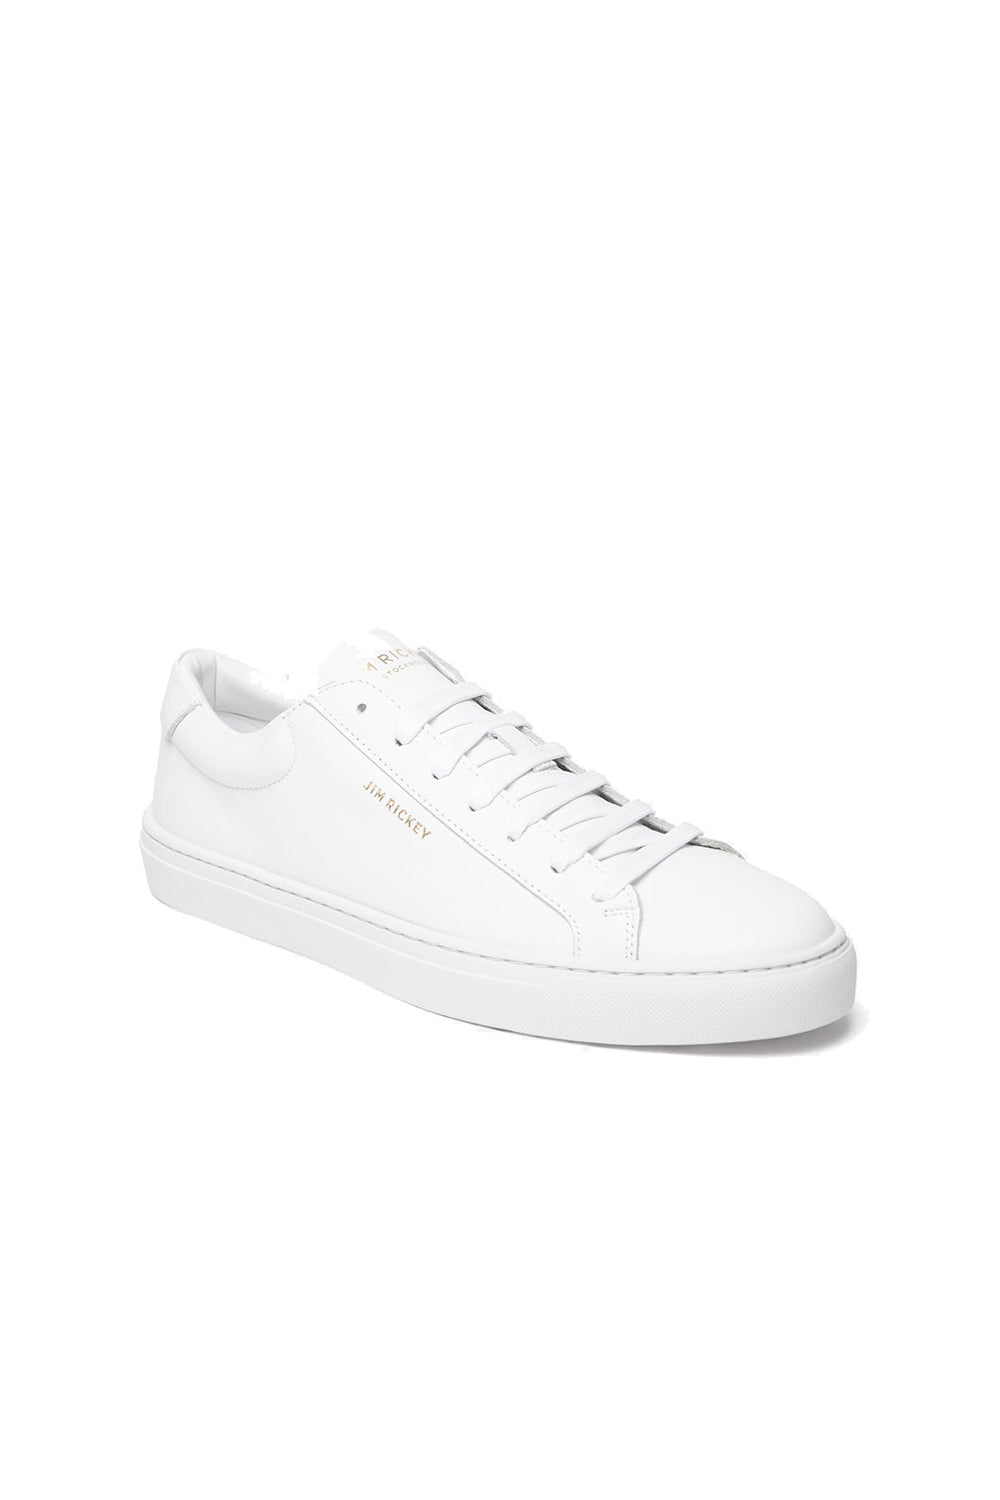 Spin Sneakers Cow White